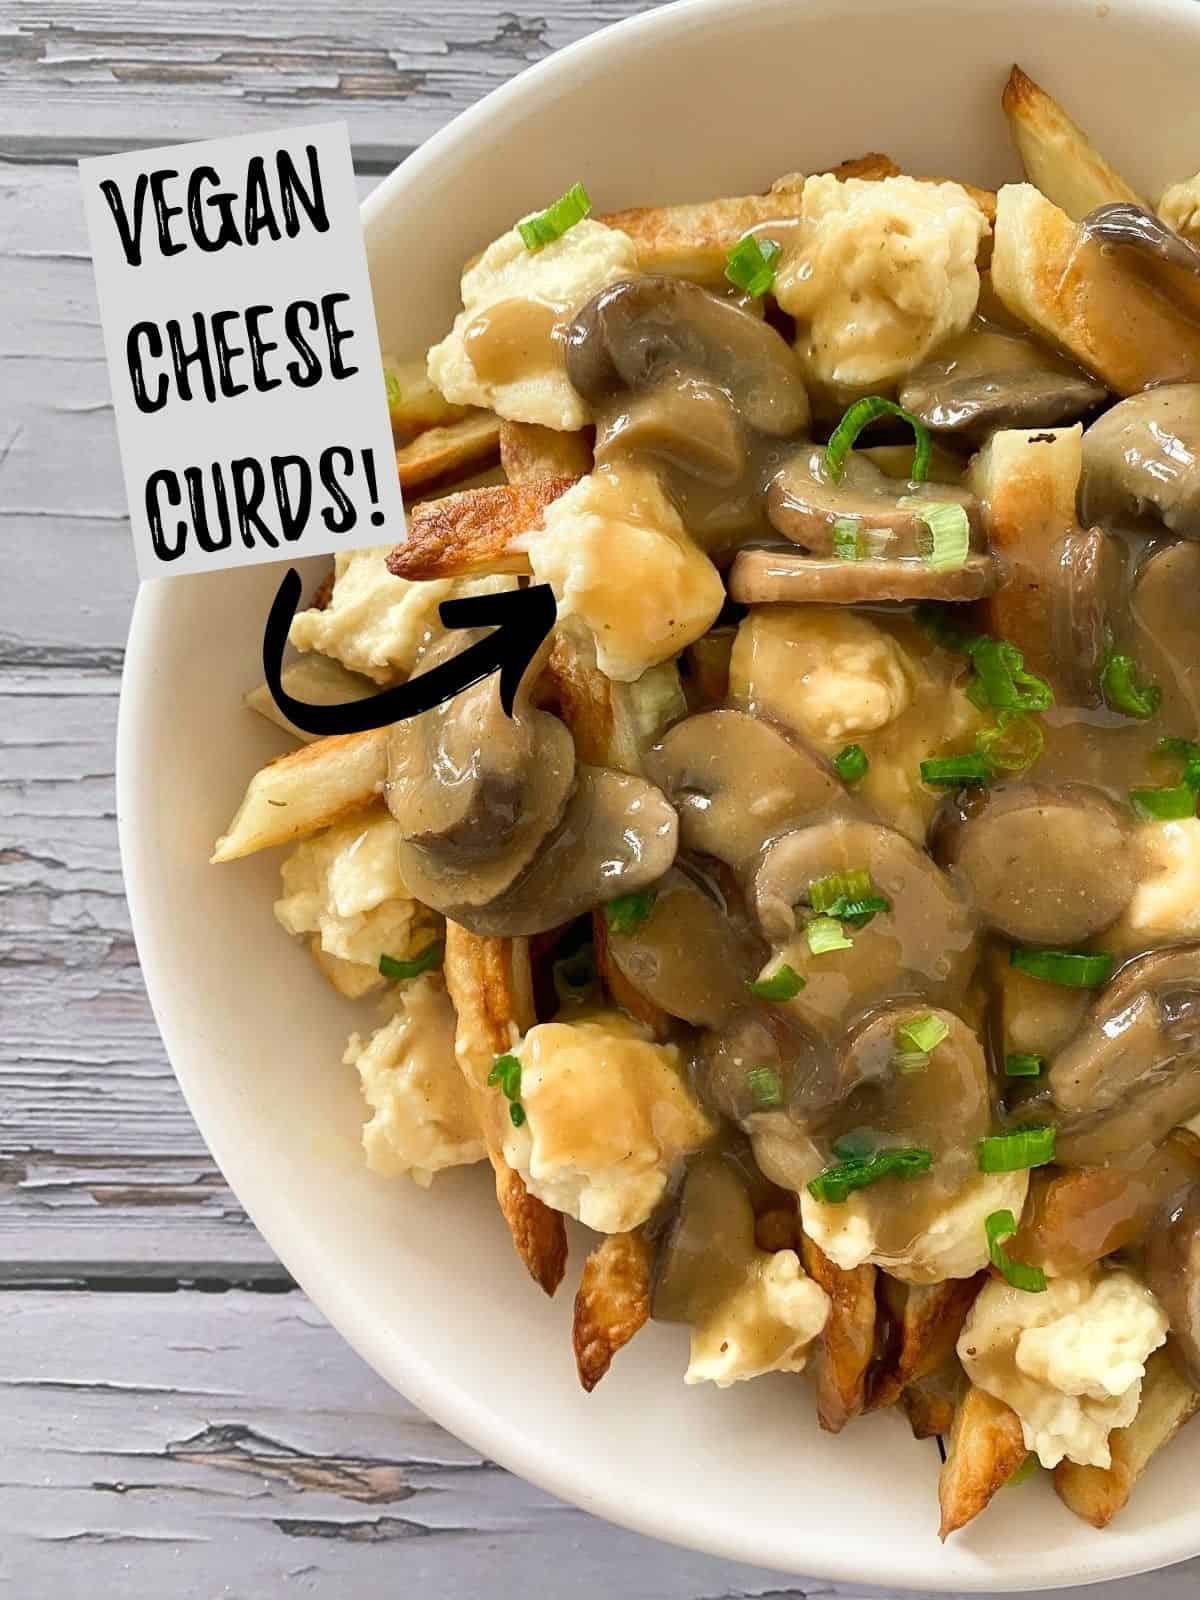 Fries, cheese and gravy in serving dish